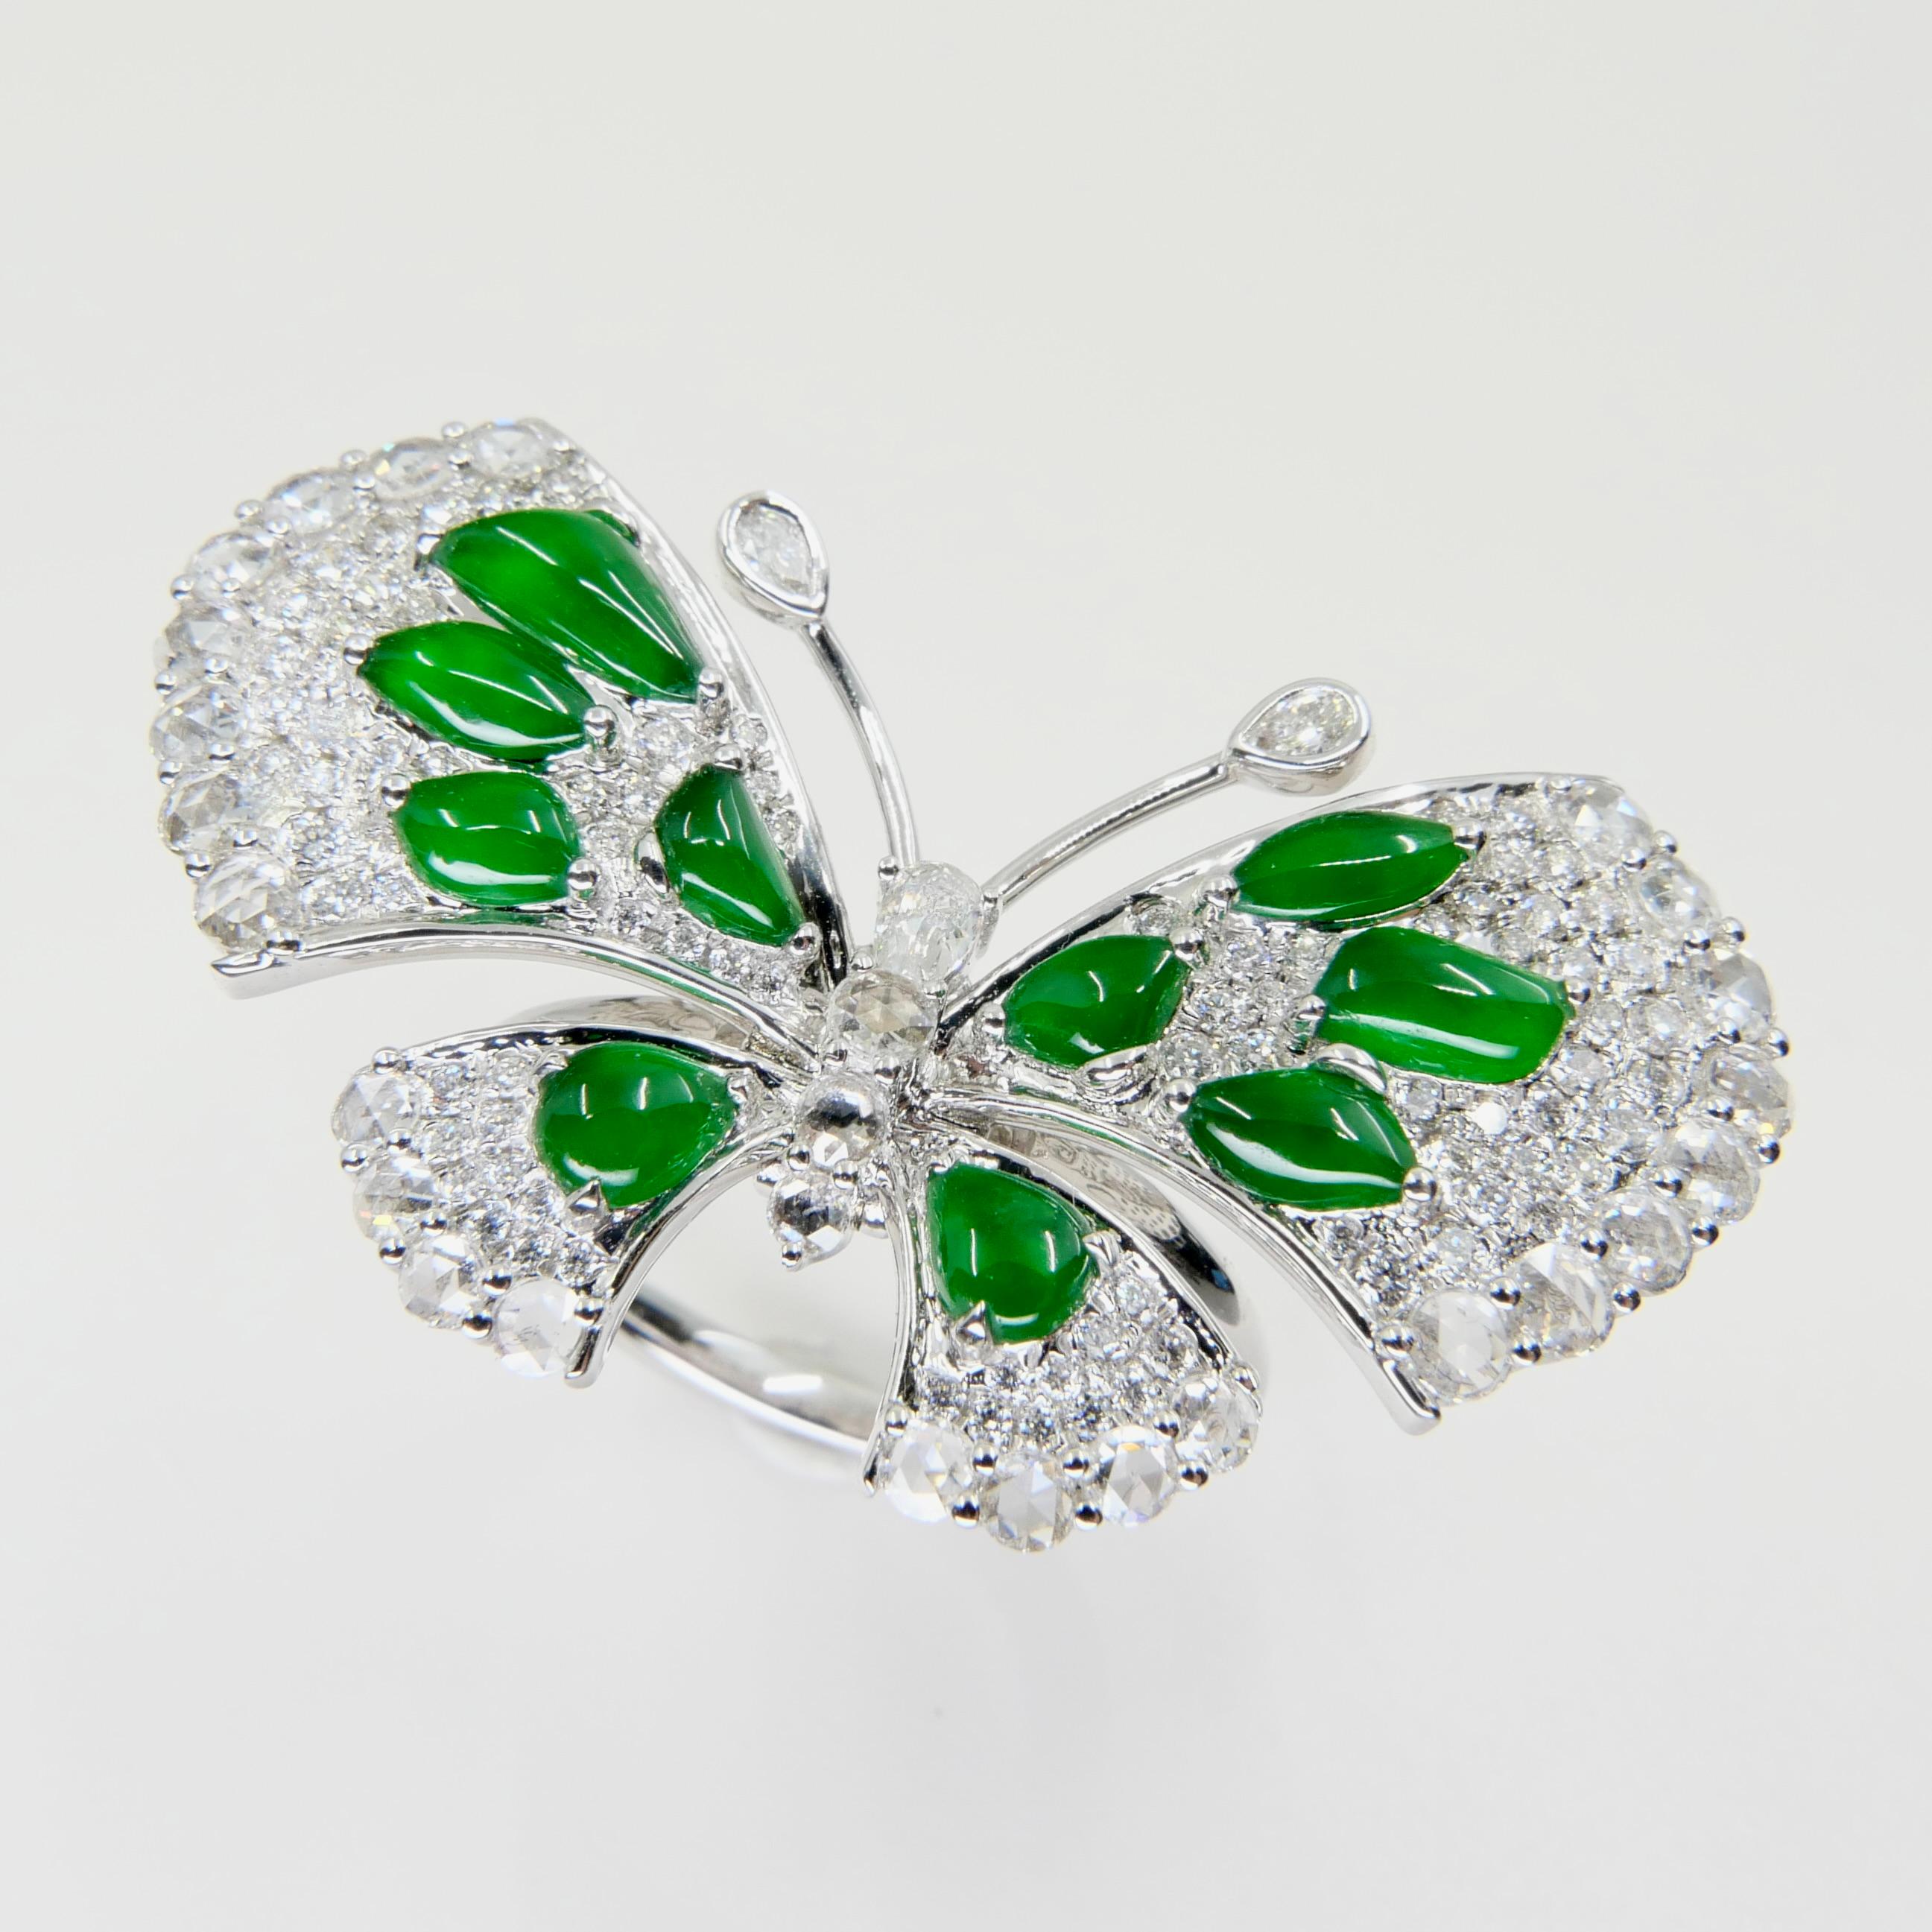 Certified Imperial Green Jade Butterfly & Rose Cut Diamond Ring, Pendant, Brooch For Sale 9